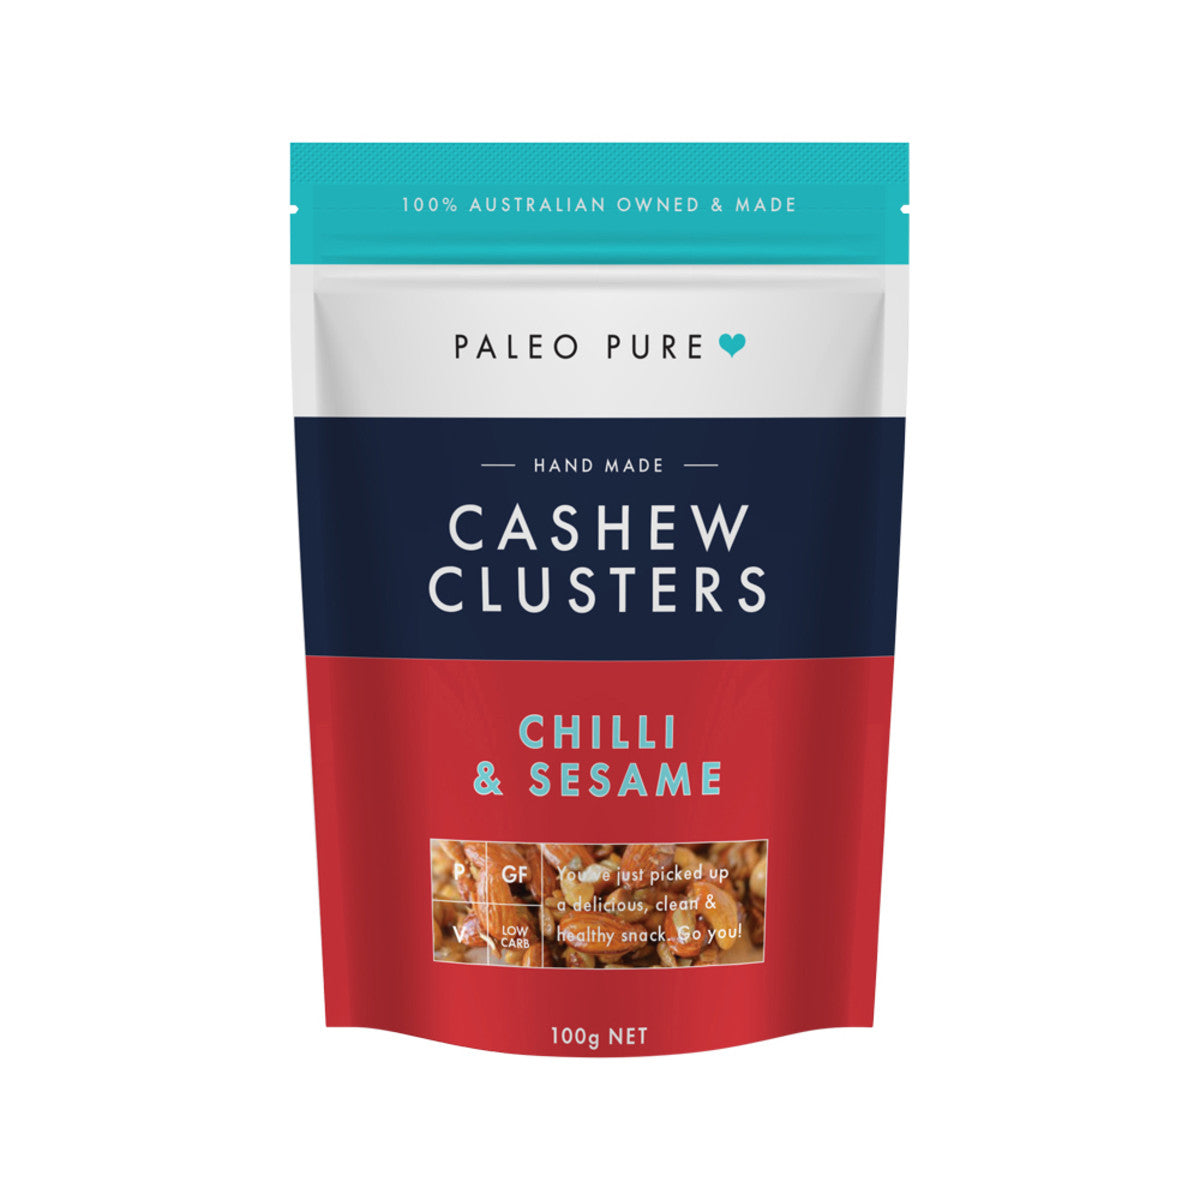 Paleo Pure Cashew Clusters Chilli and Sesame 100g